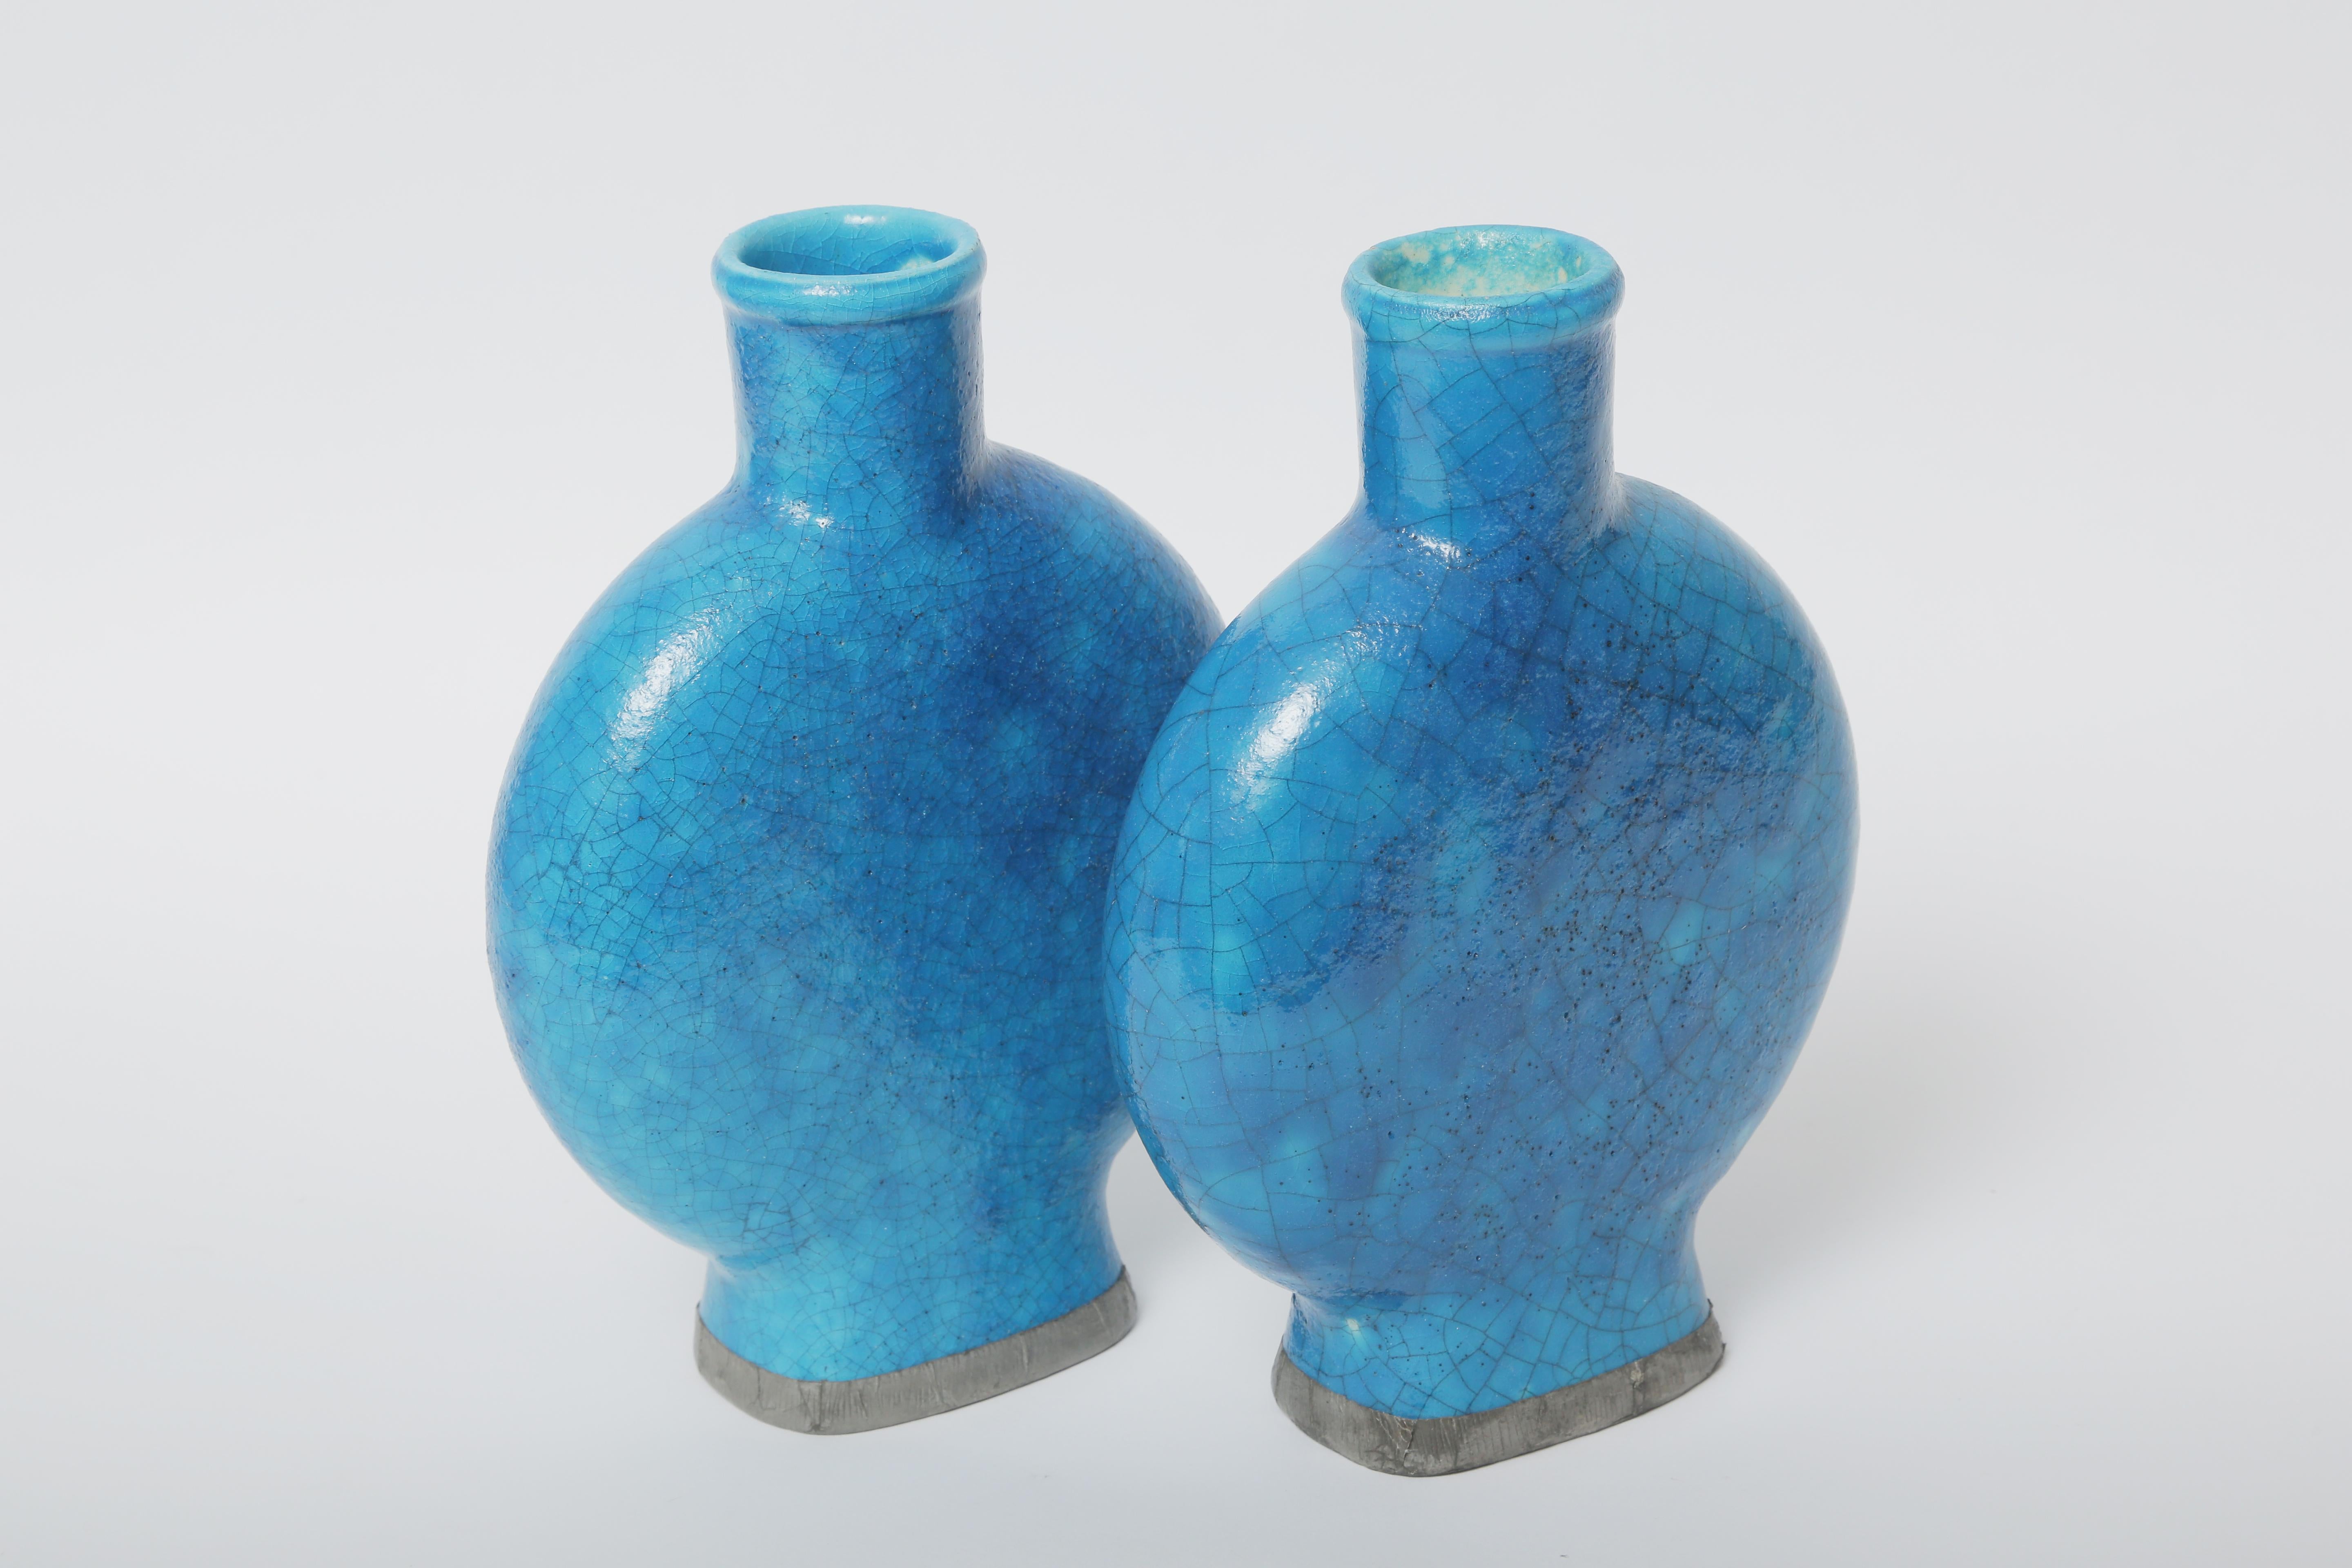 A rare pair of Edmond Lachenal turquoise blue volcanic glazed ceramic vases in wonderful antique condition. Edmond Lachenal (1855-1948) was considered an innovator and a pivotal figure in the Art Nouveau Ceramic Art Circle. In 1899 at the World's